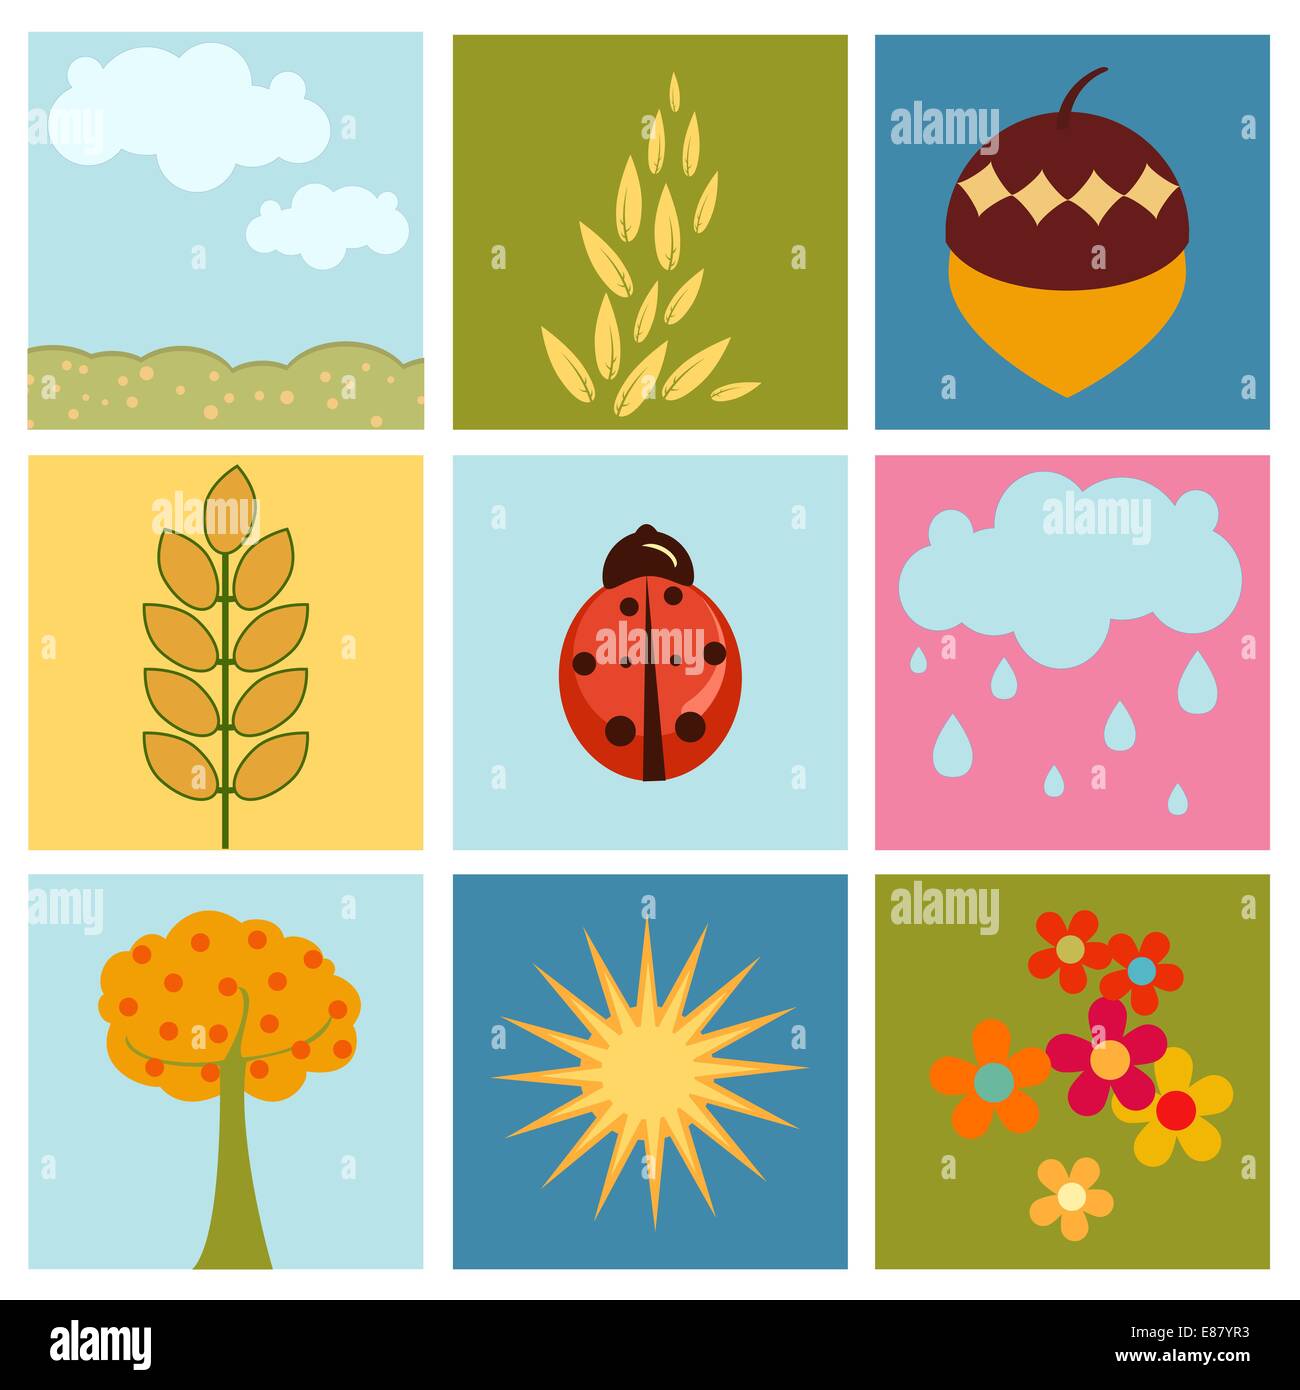 Vector Illustration of retro nature design Pretty summer pictures in Friendly kids style Stock Vector